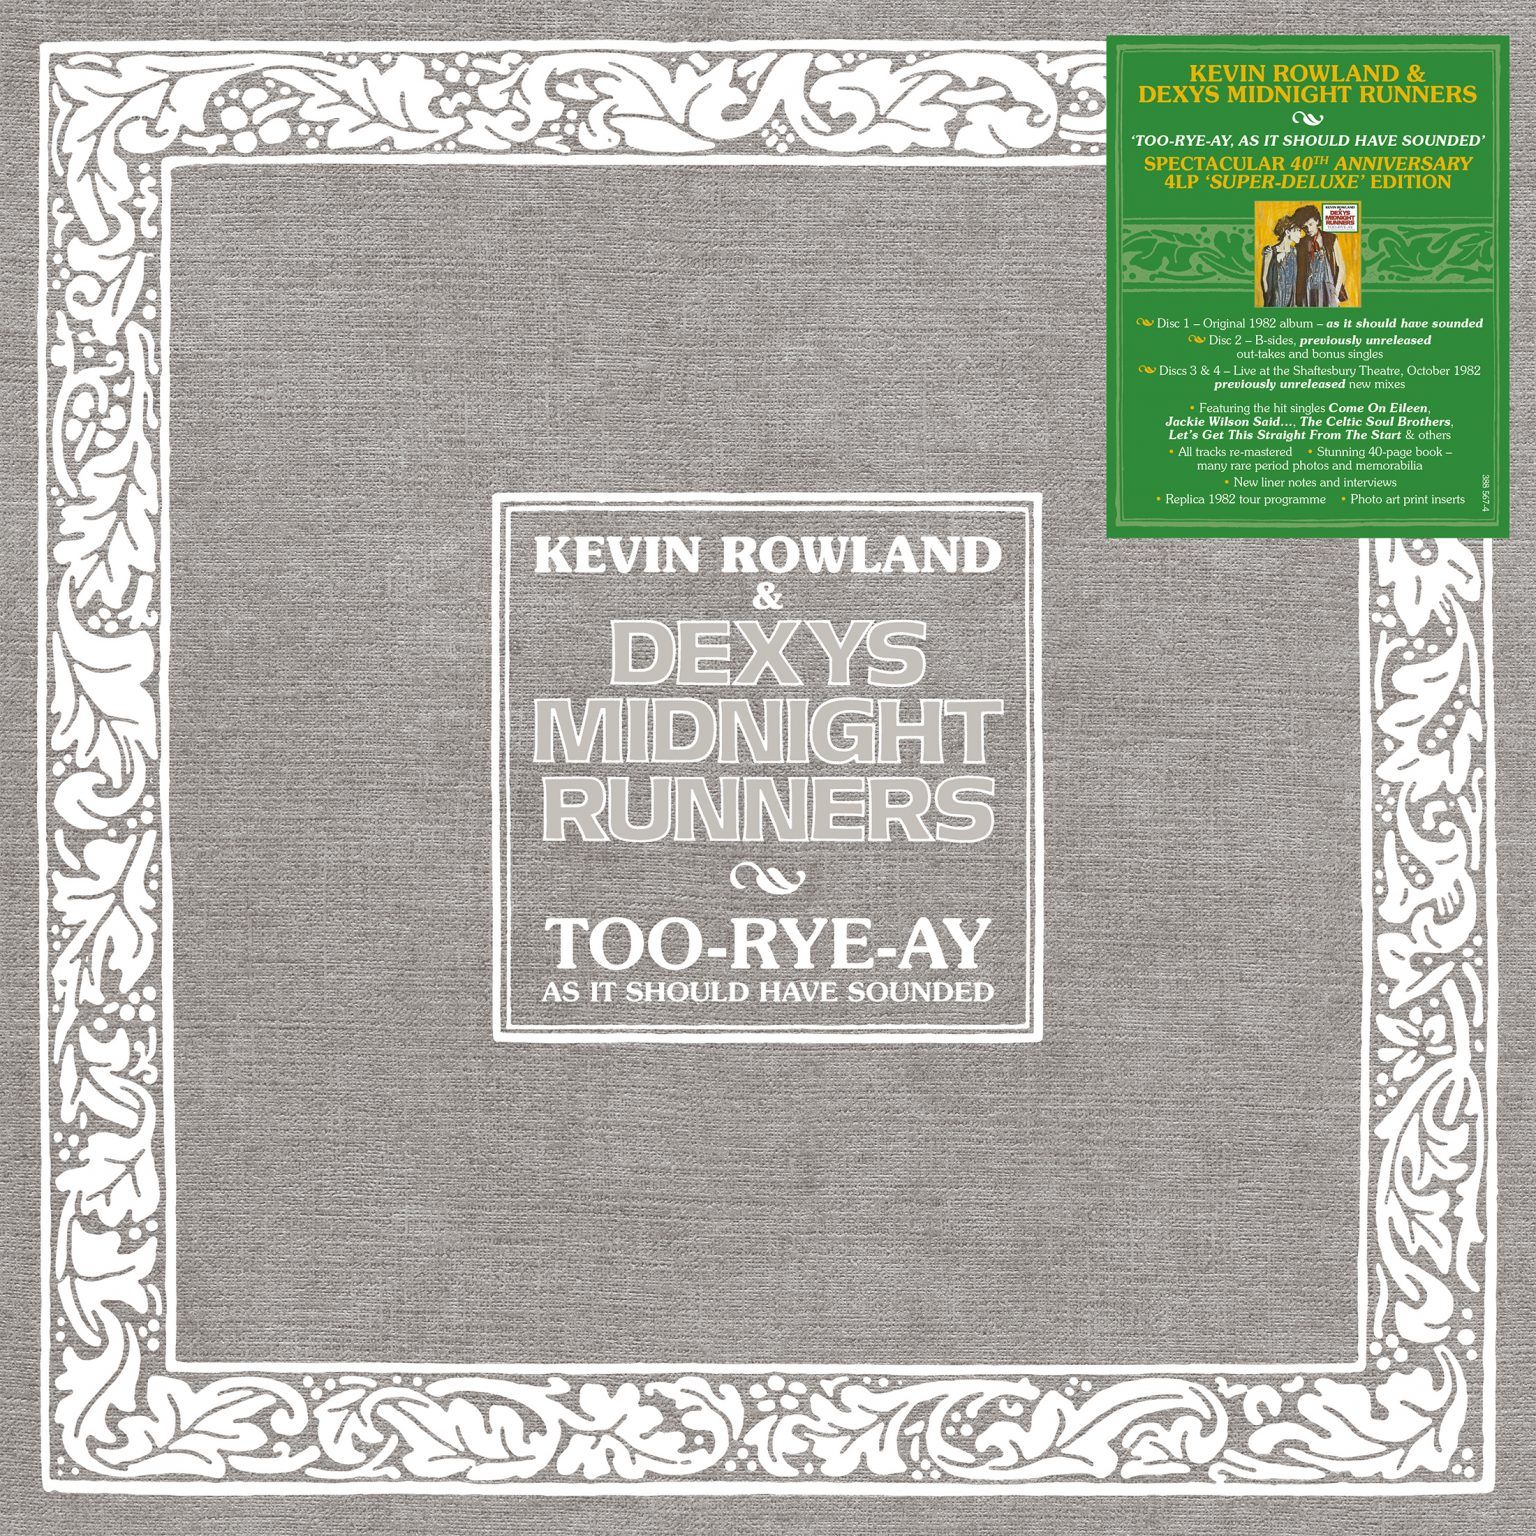 Kevin Rowland and Dexys Midnight Runners Too-Rye-Ay Boxset Cover with sticker